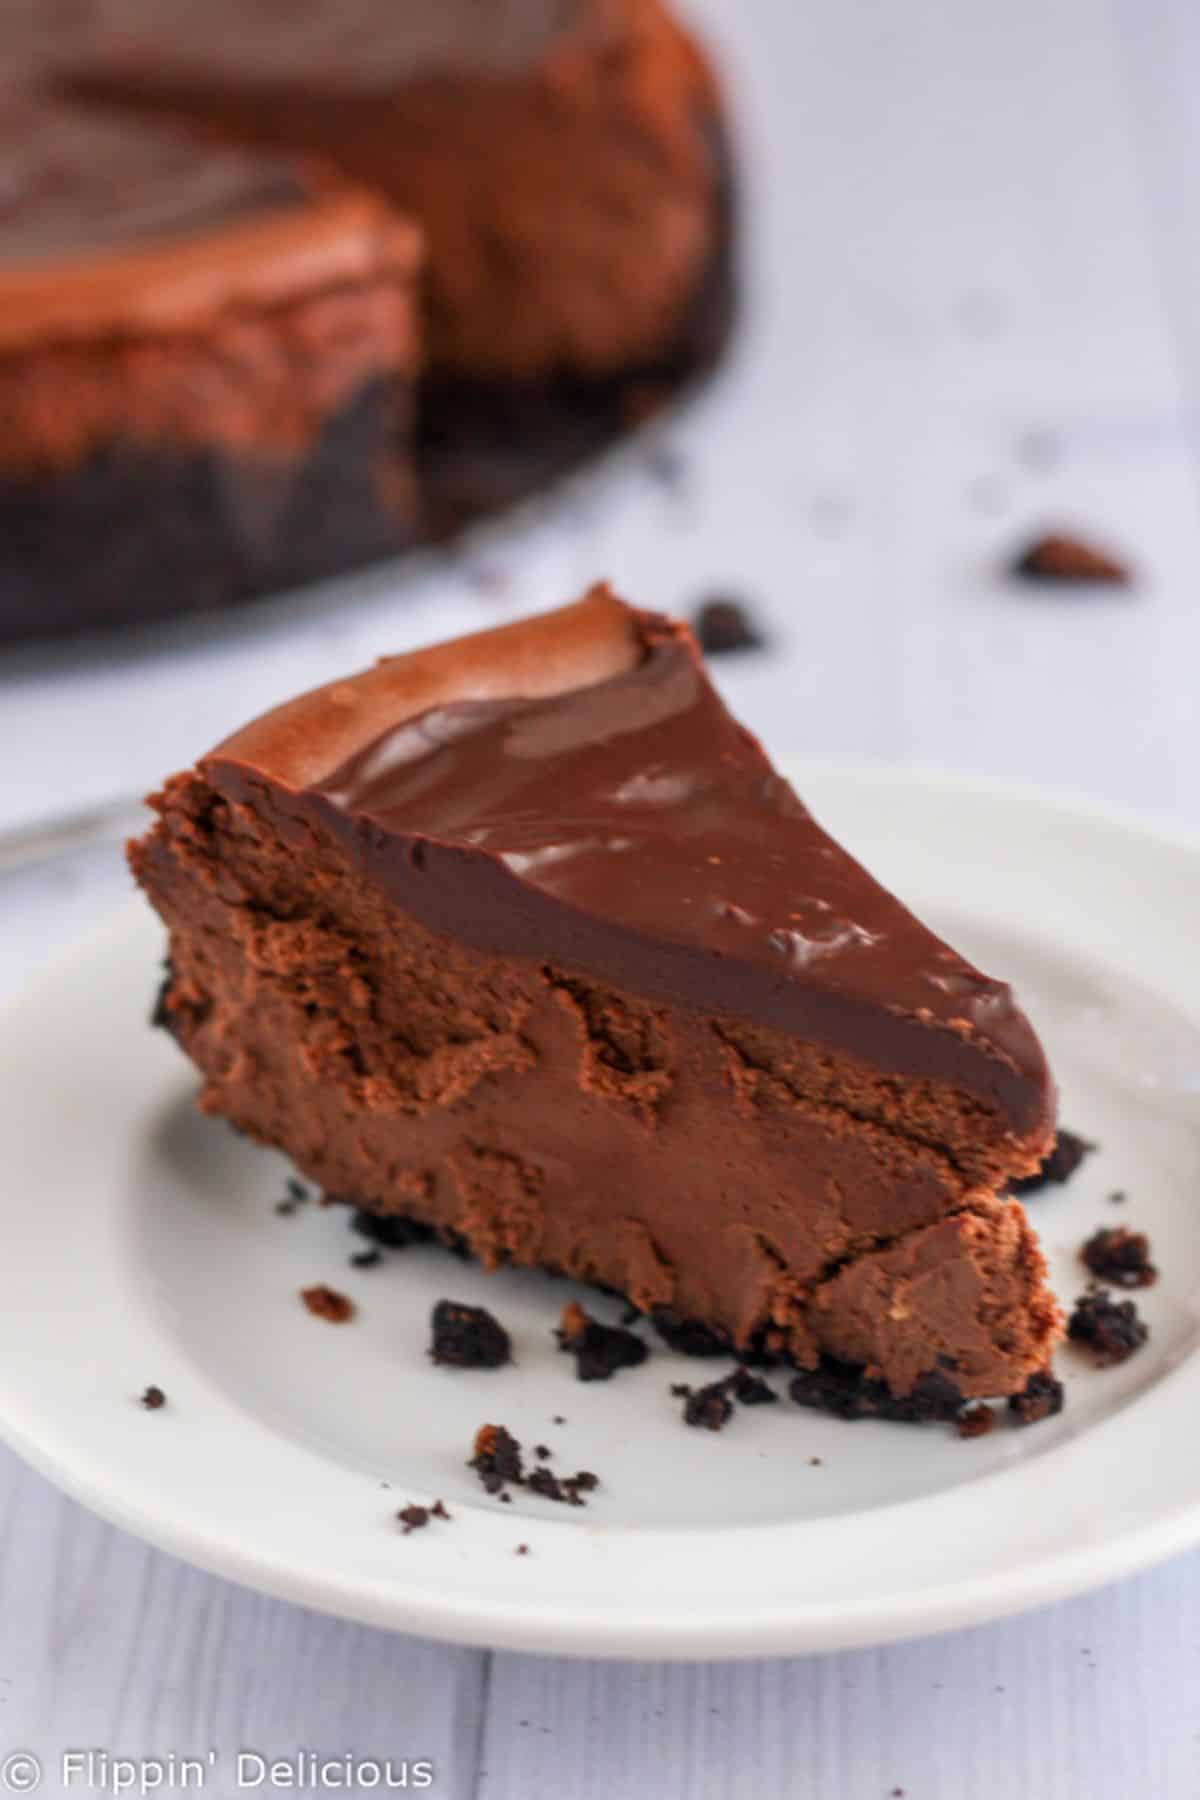 A delicious gluten-free piece of Chocolate Cheesecake on a white plate.